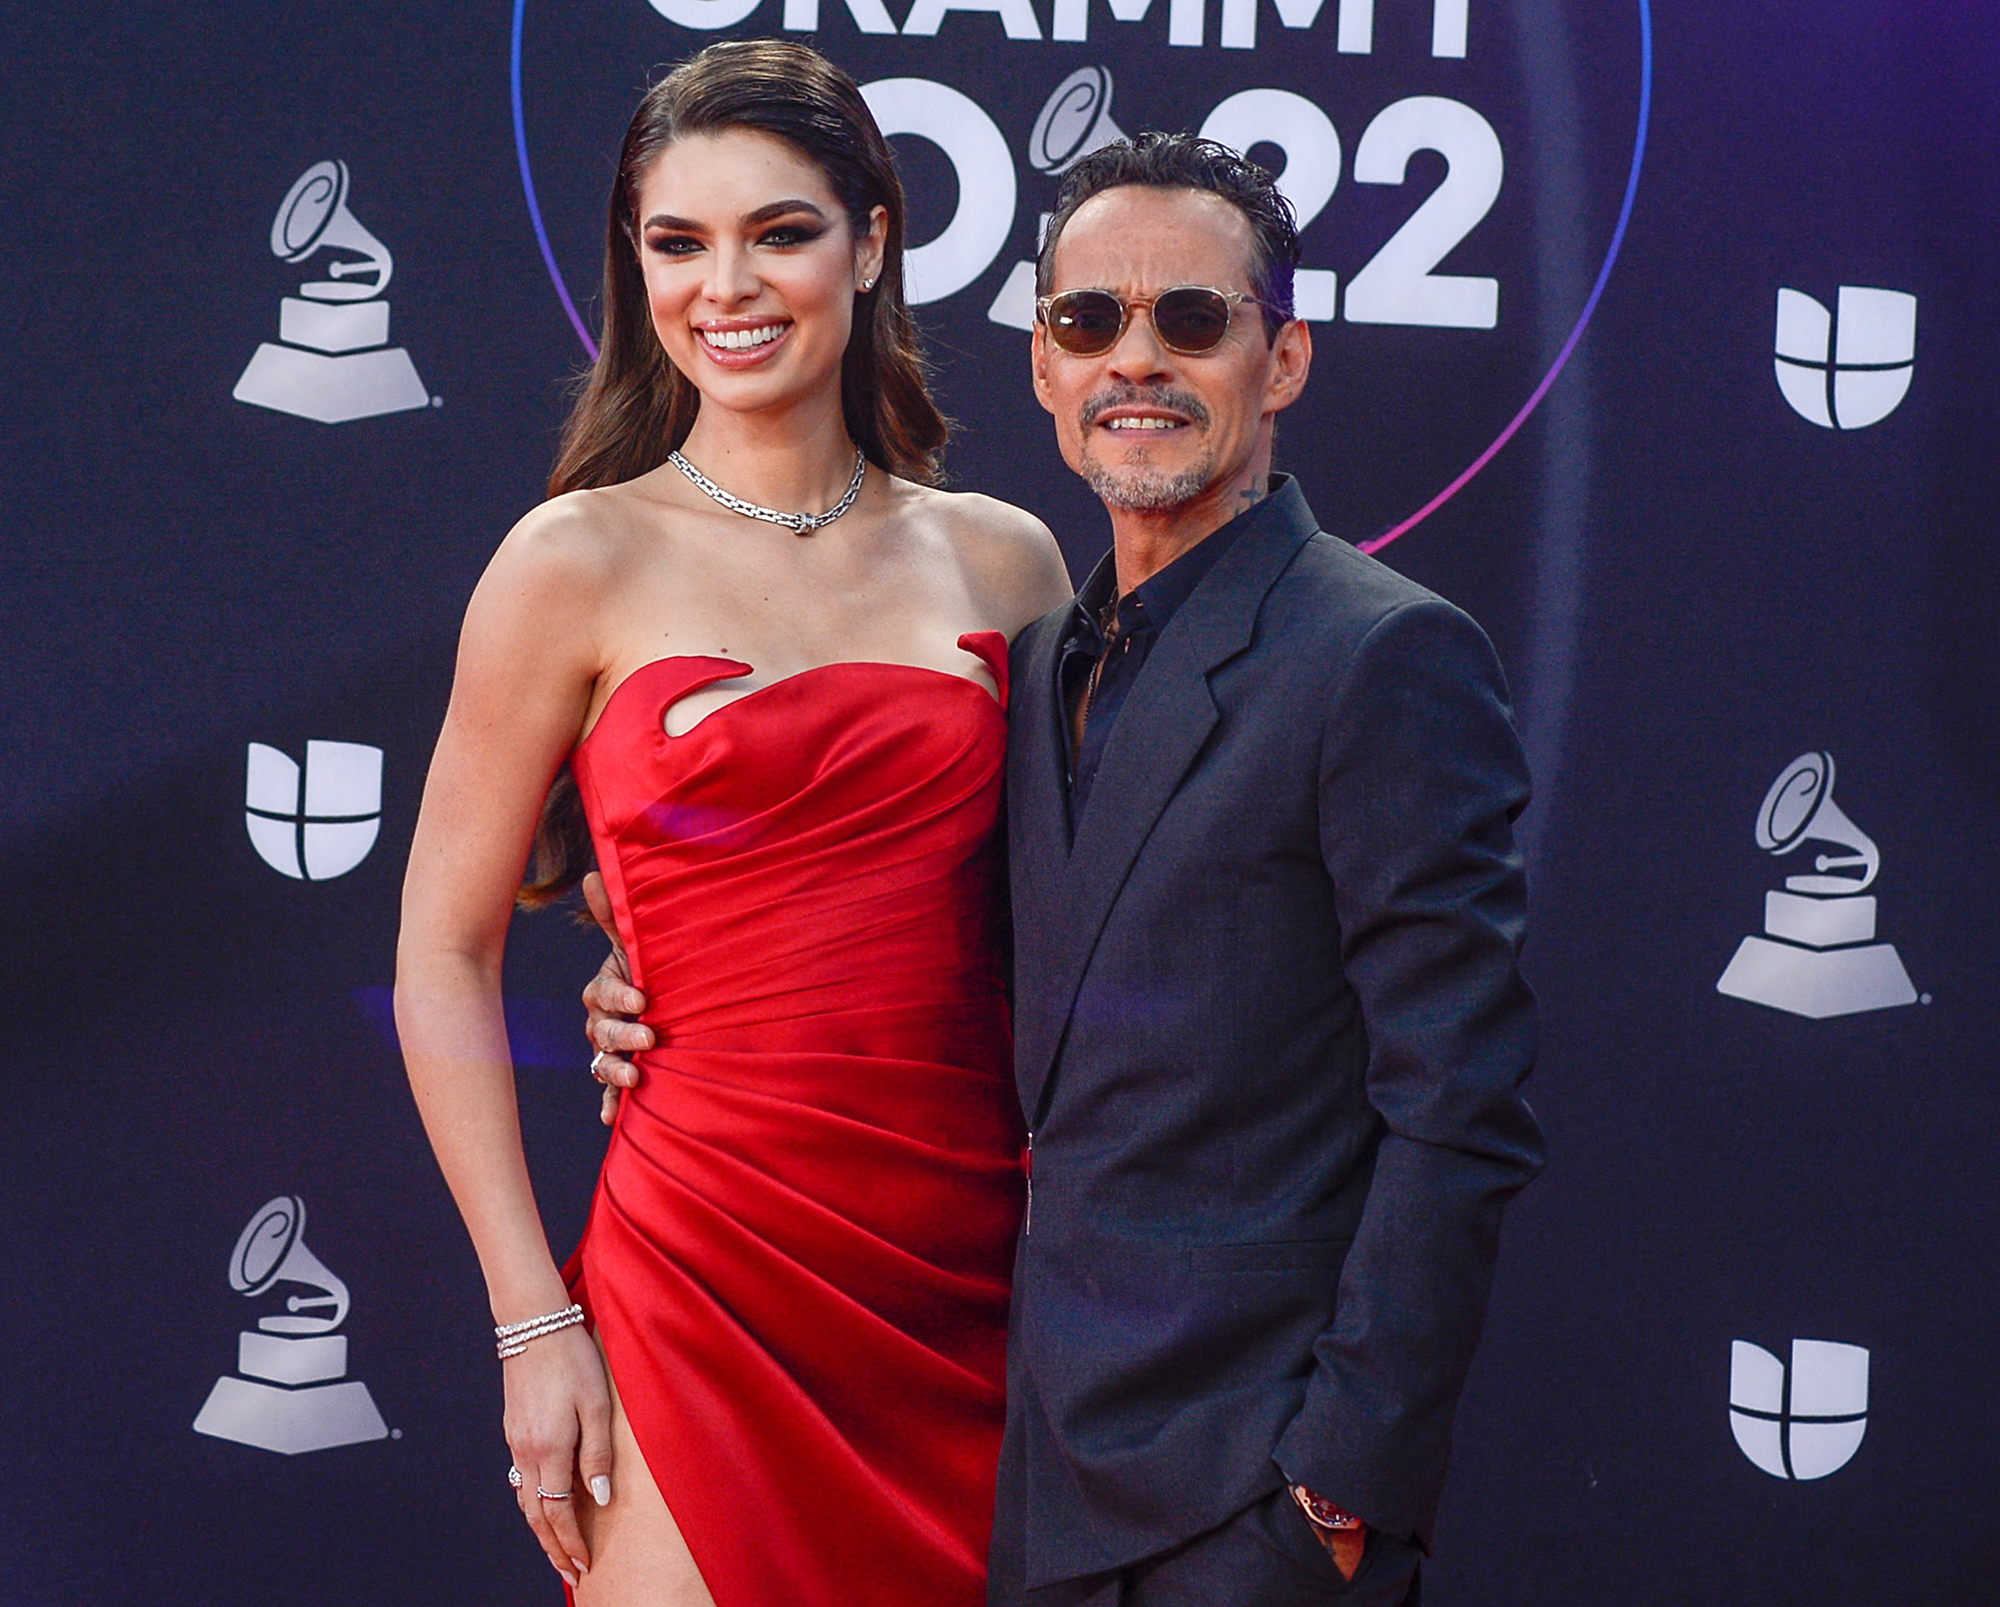 Marc Anthony, Model Nadia Ferreira Are Married: Details